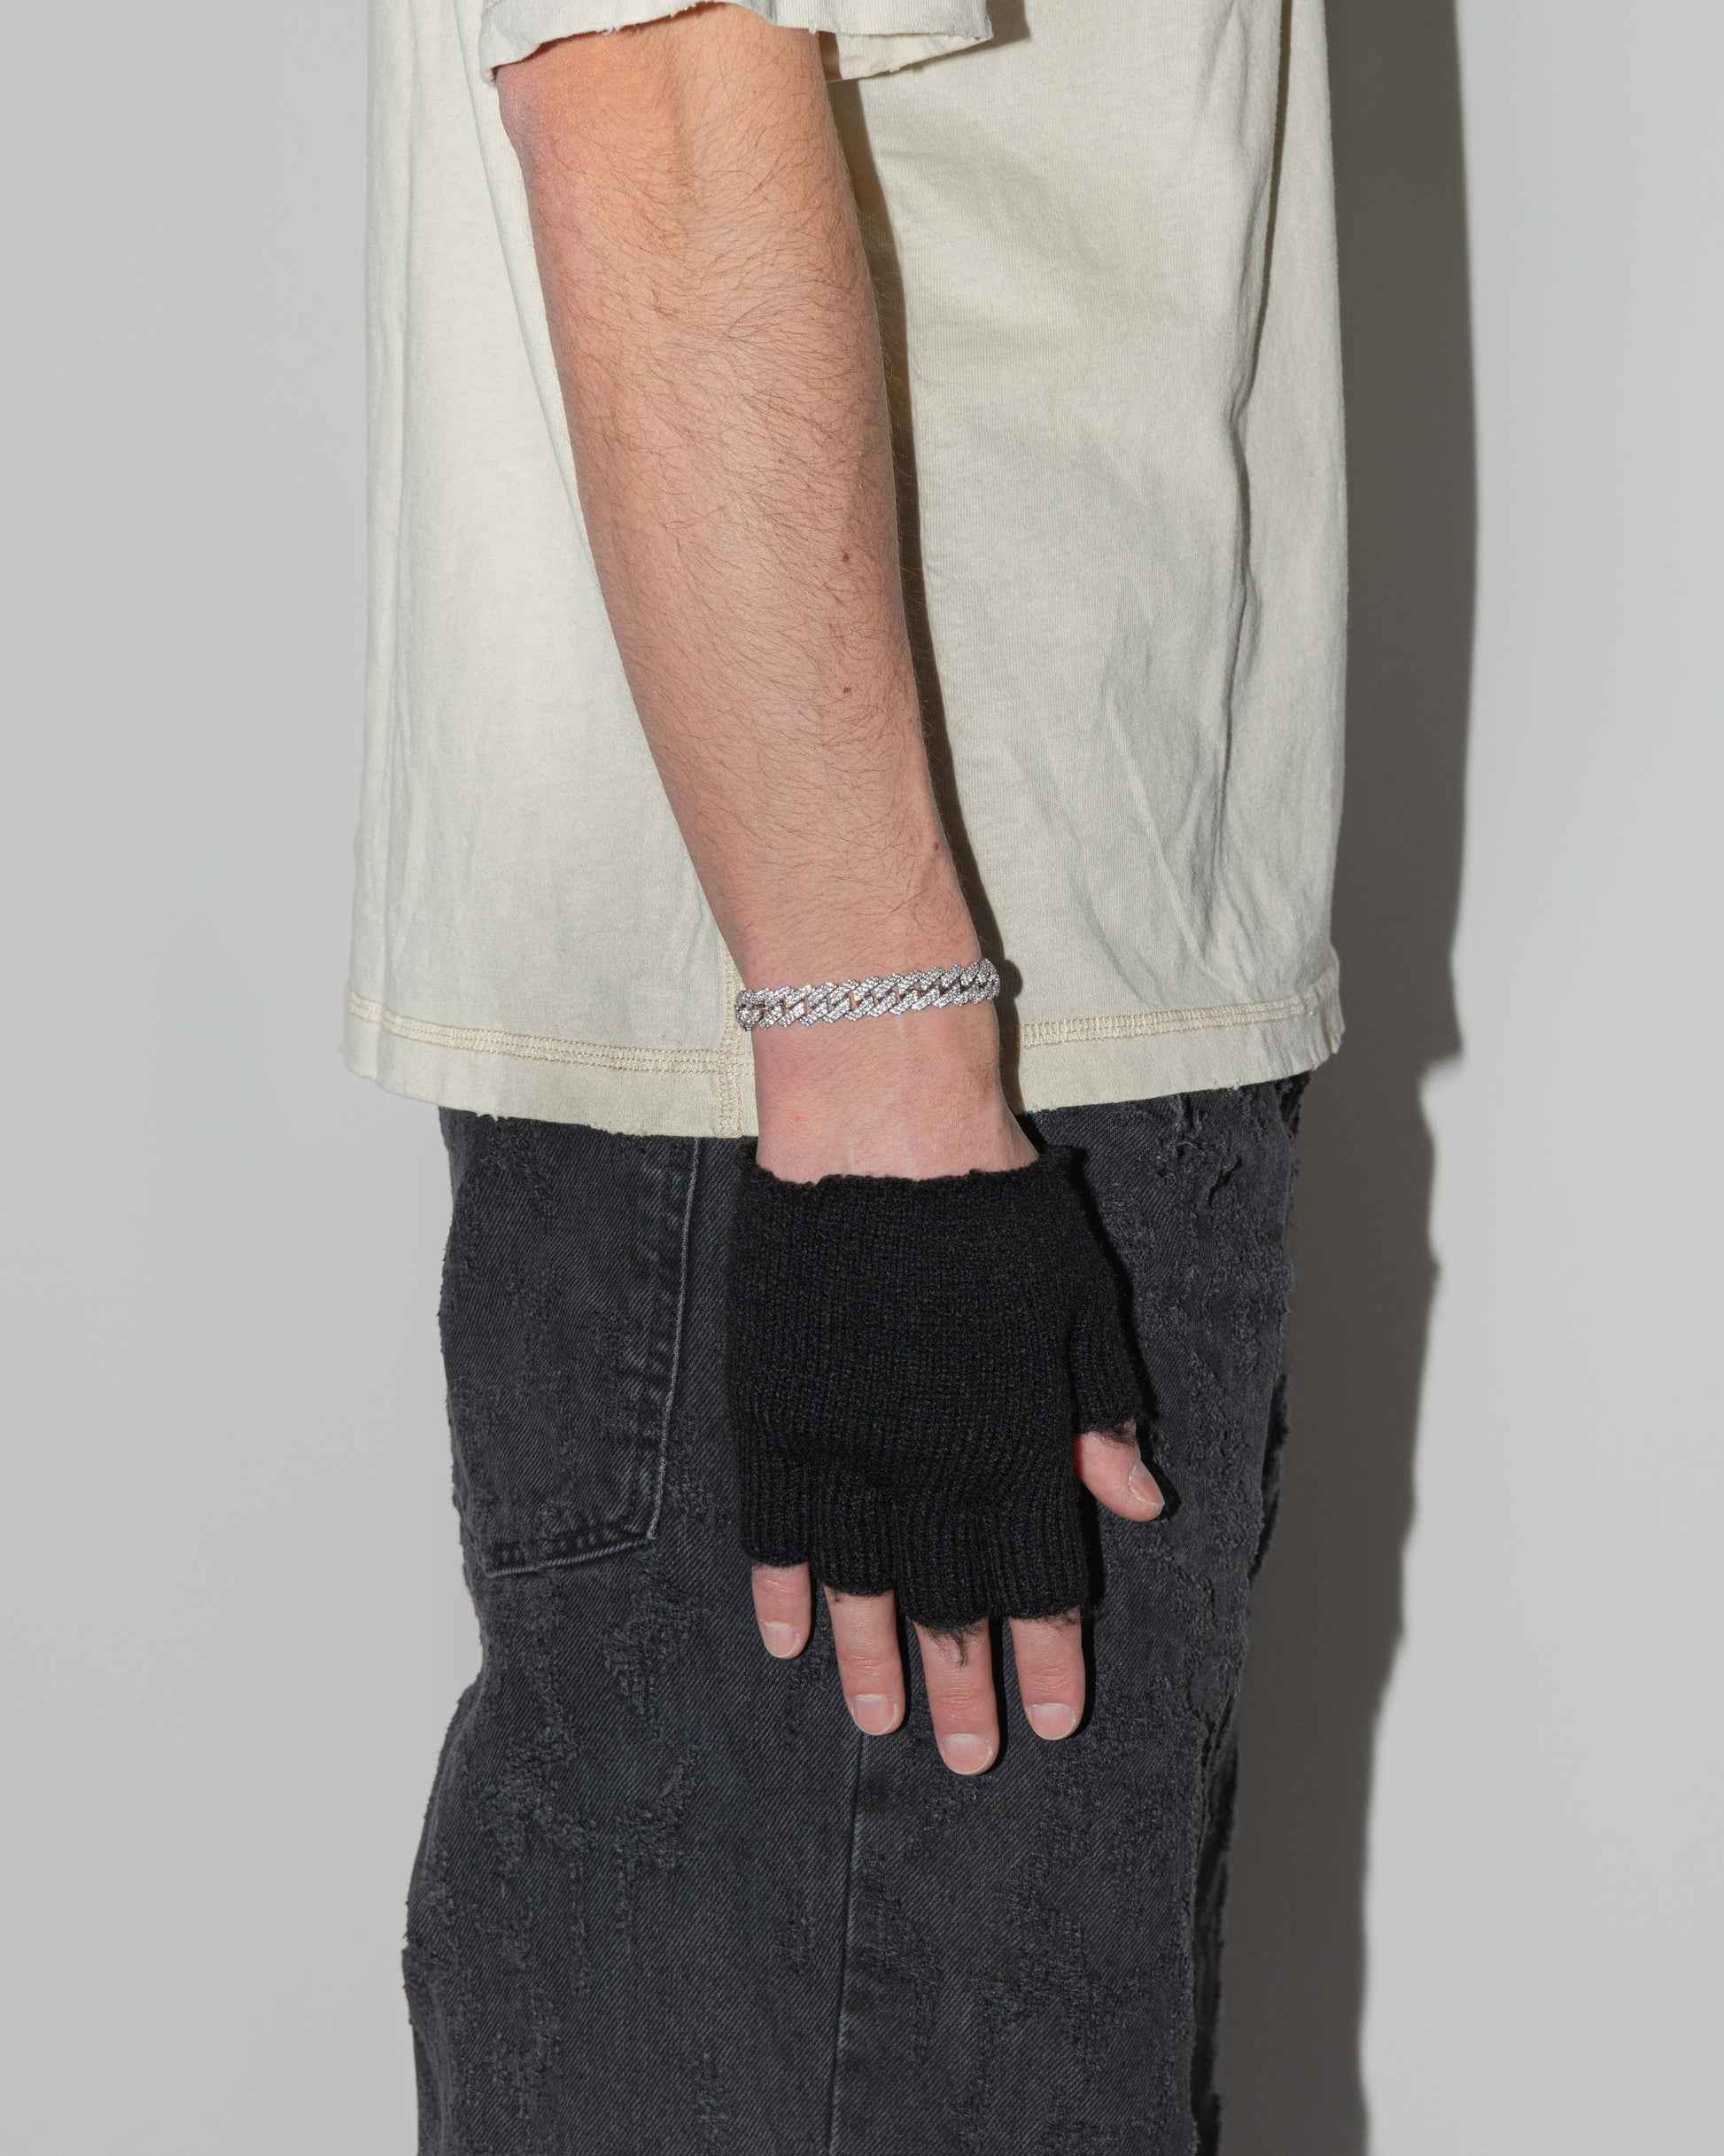 street style man wearing 8k white gold coated mini prong chain bracelet with hand-set micropavé stones in white